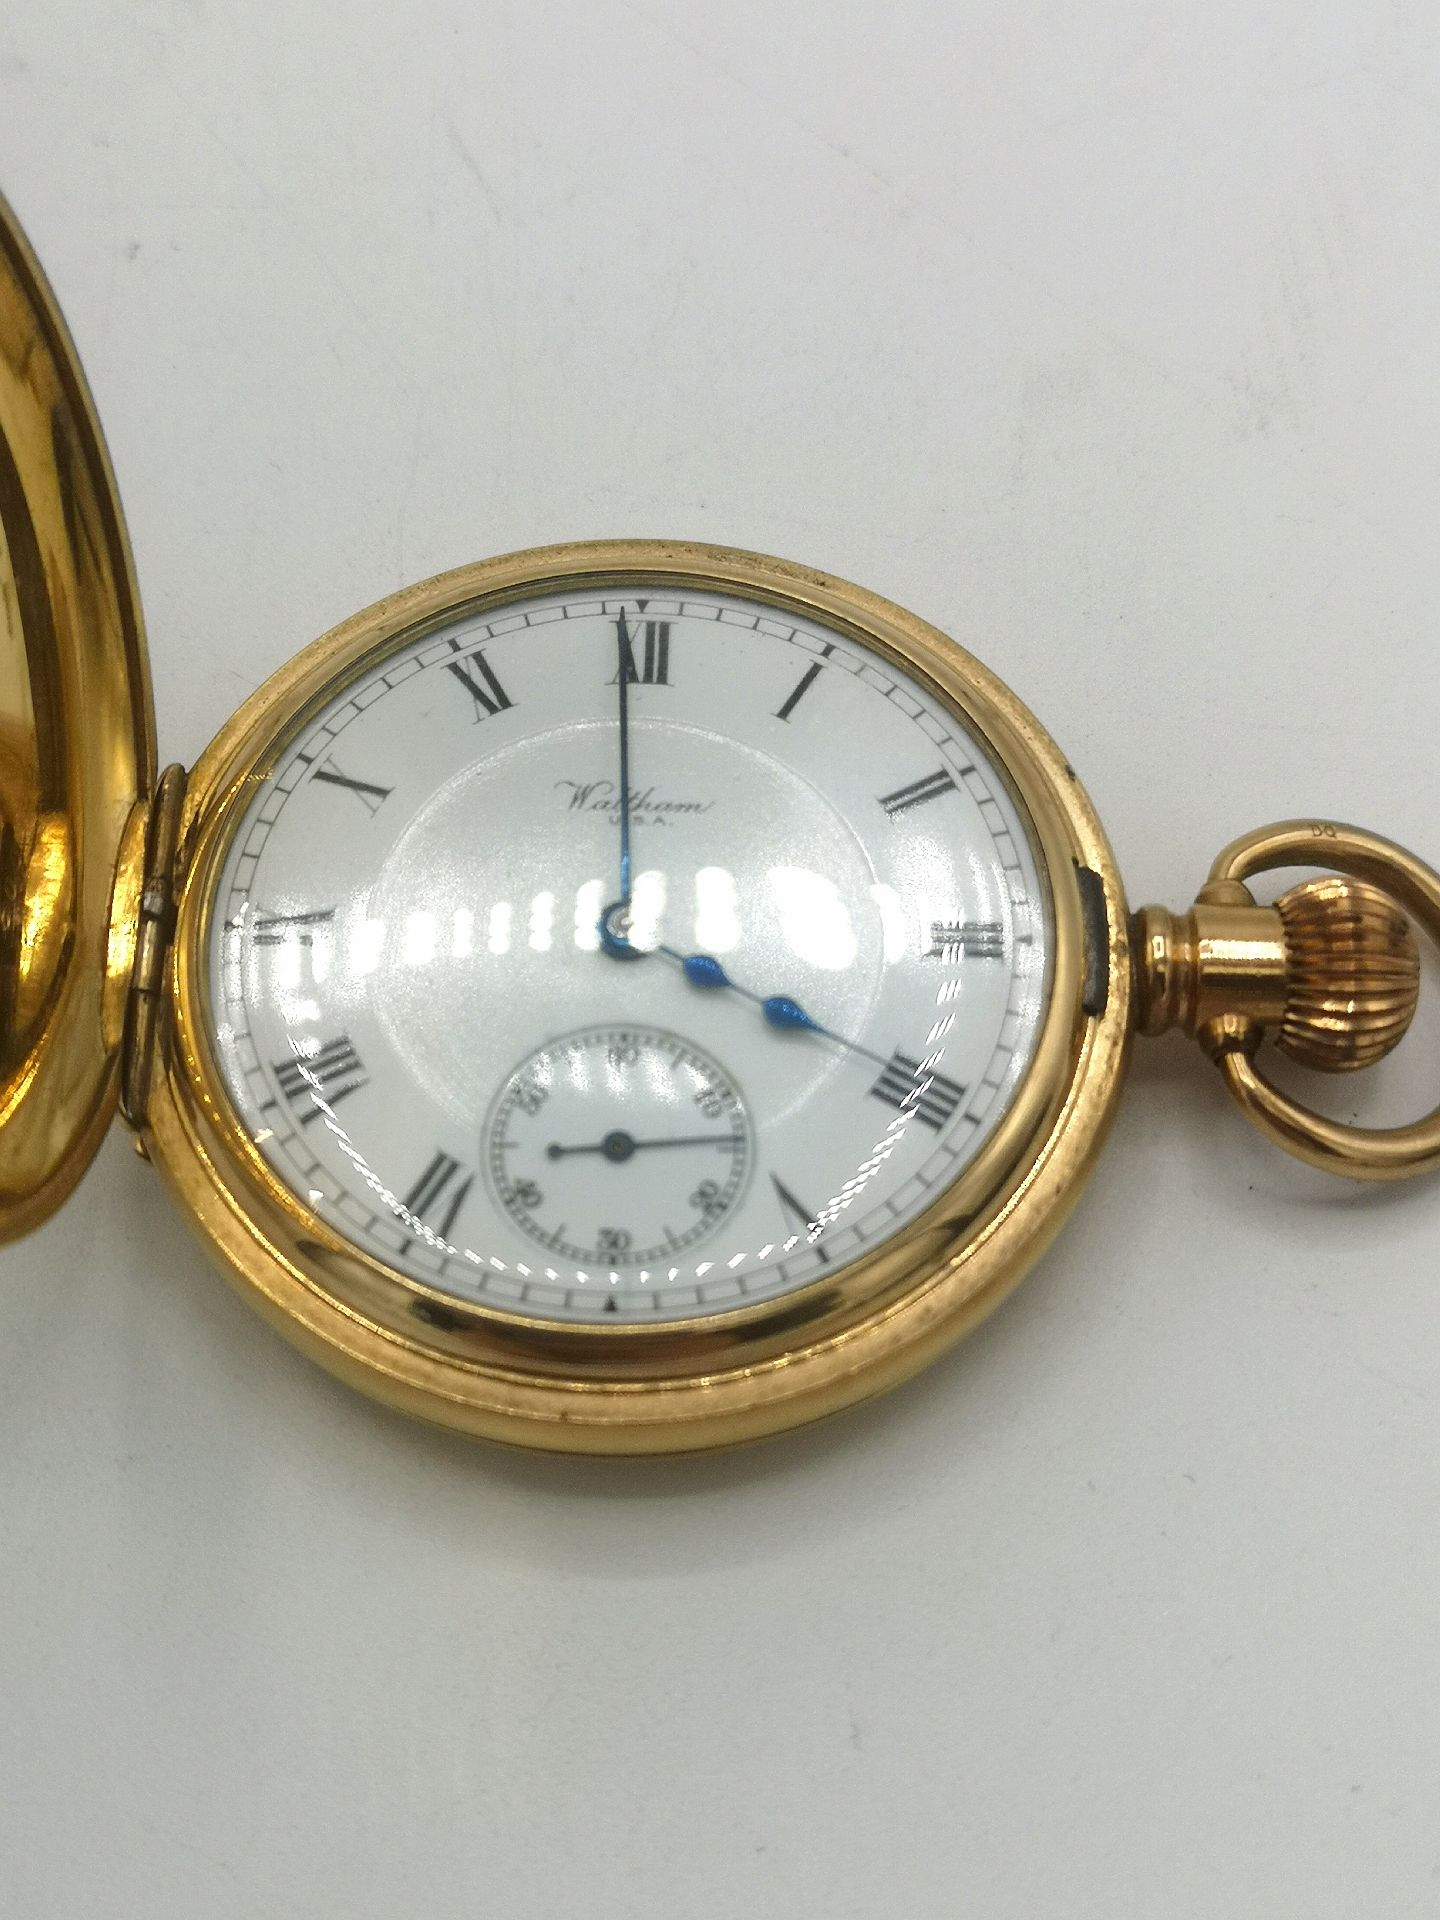 Waltham gold plated half hunter watch - Image 4 of 9